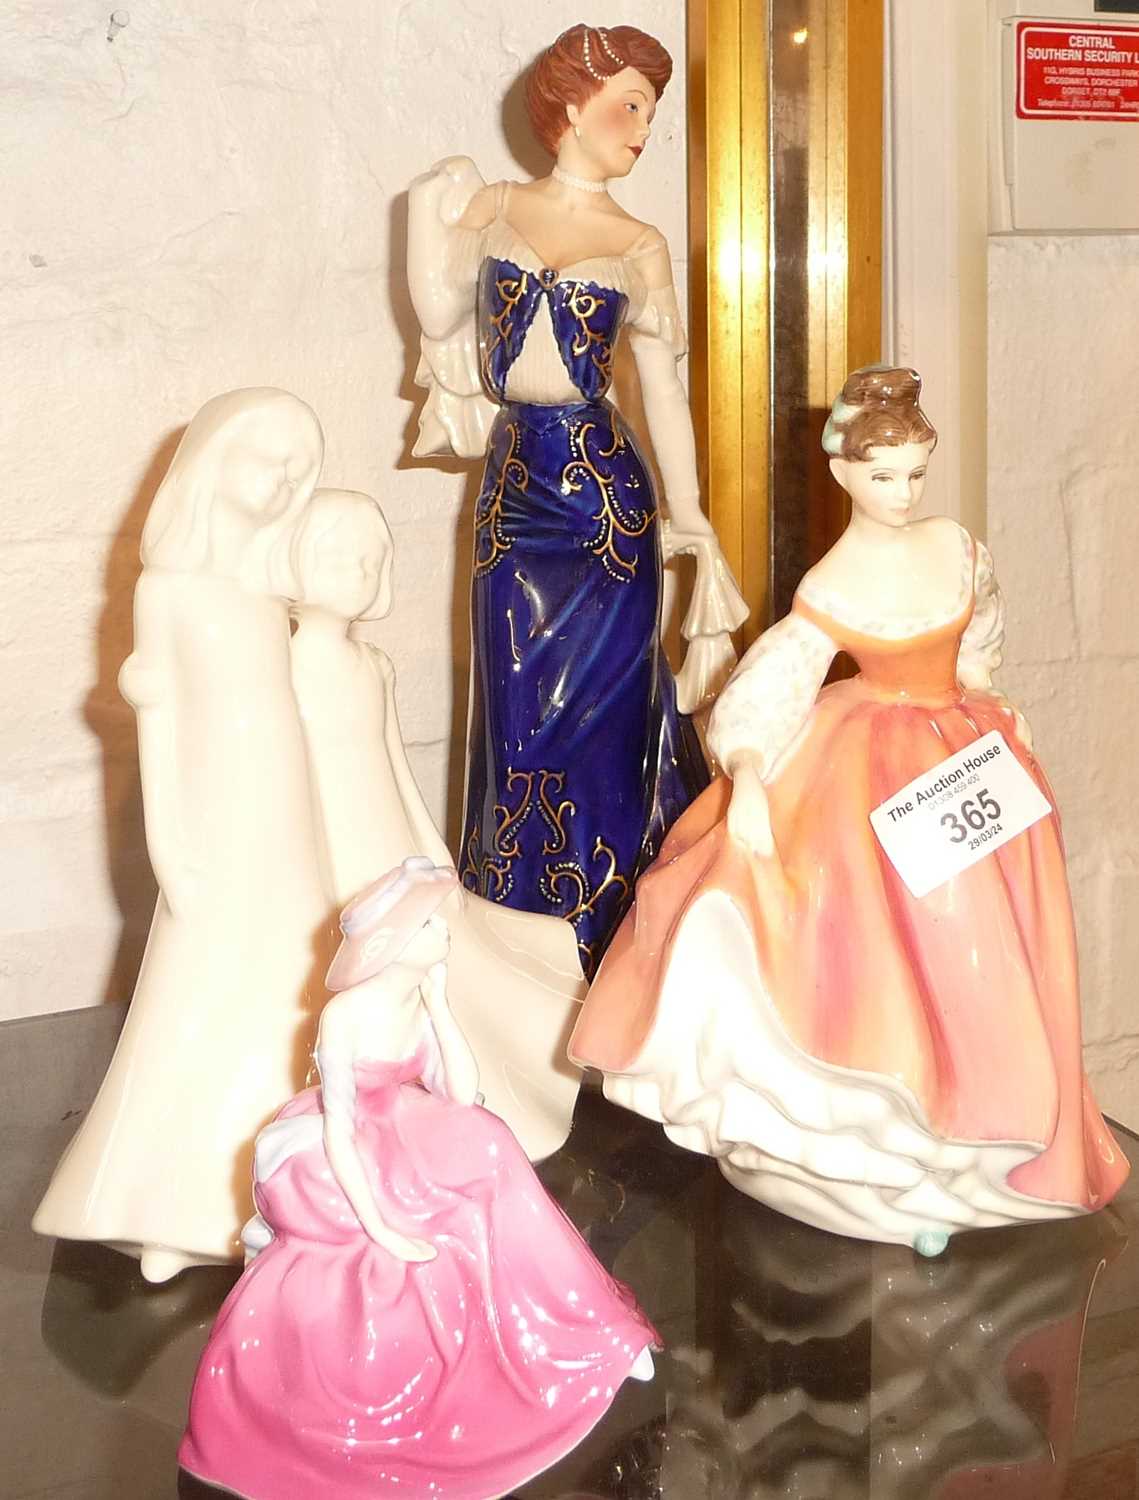 Royal Worcester figure of friendship, Royal Doulton figurine "Fair Lady" and two other china